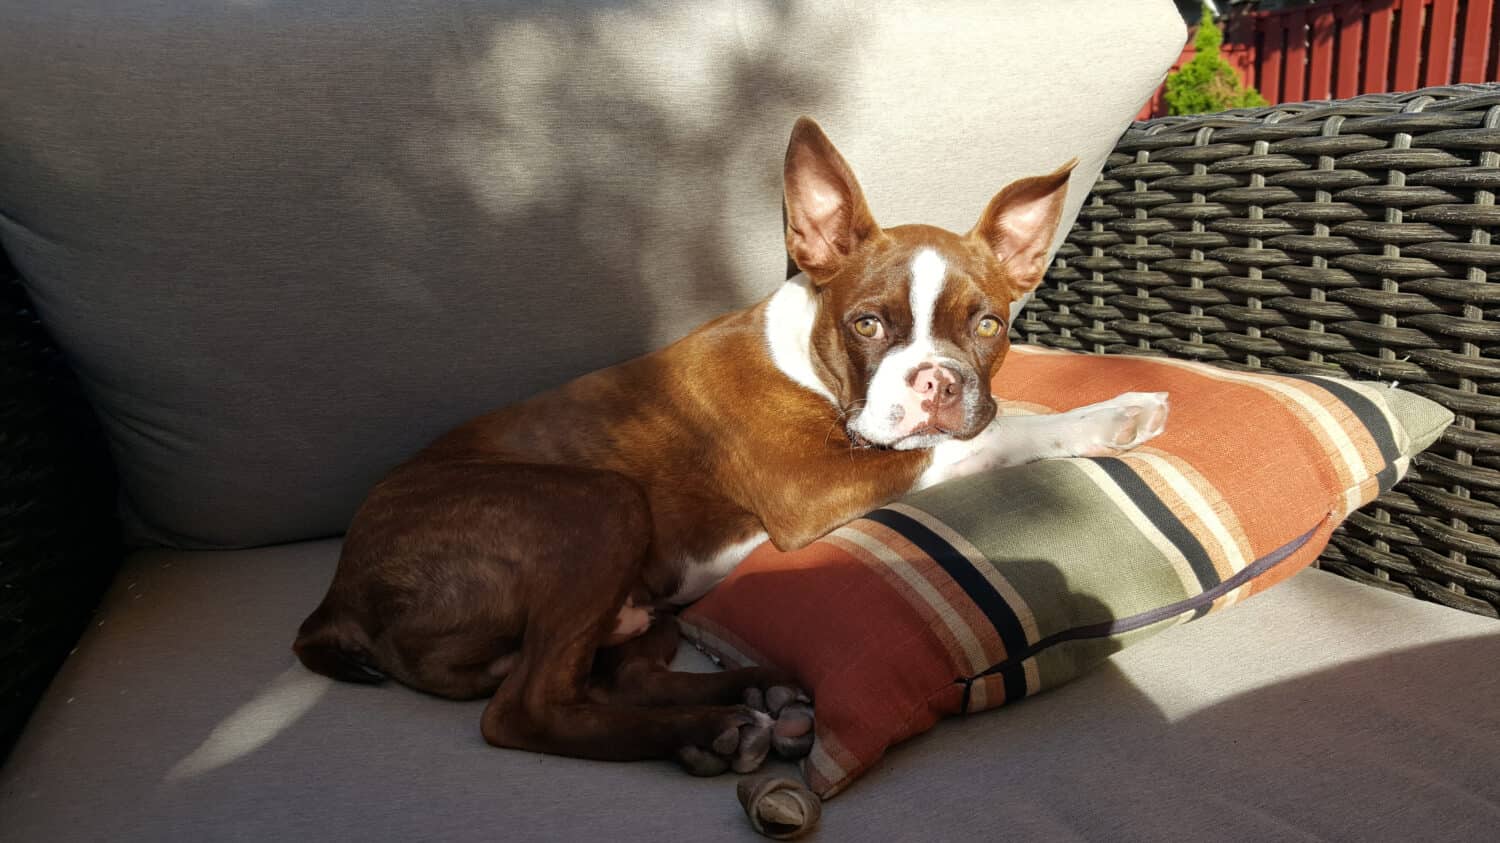 Cute Brindle Boston Terrier Puppy Dog Pet Resting in Sunlight Outside on Patio Cushion